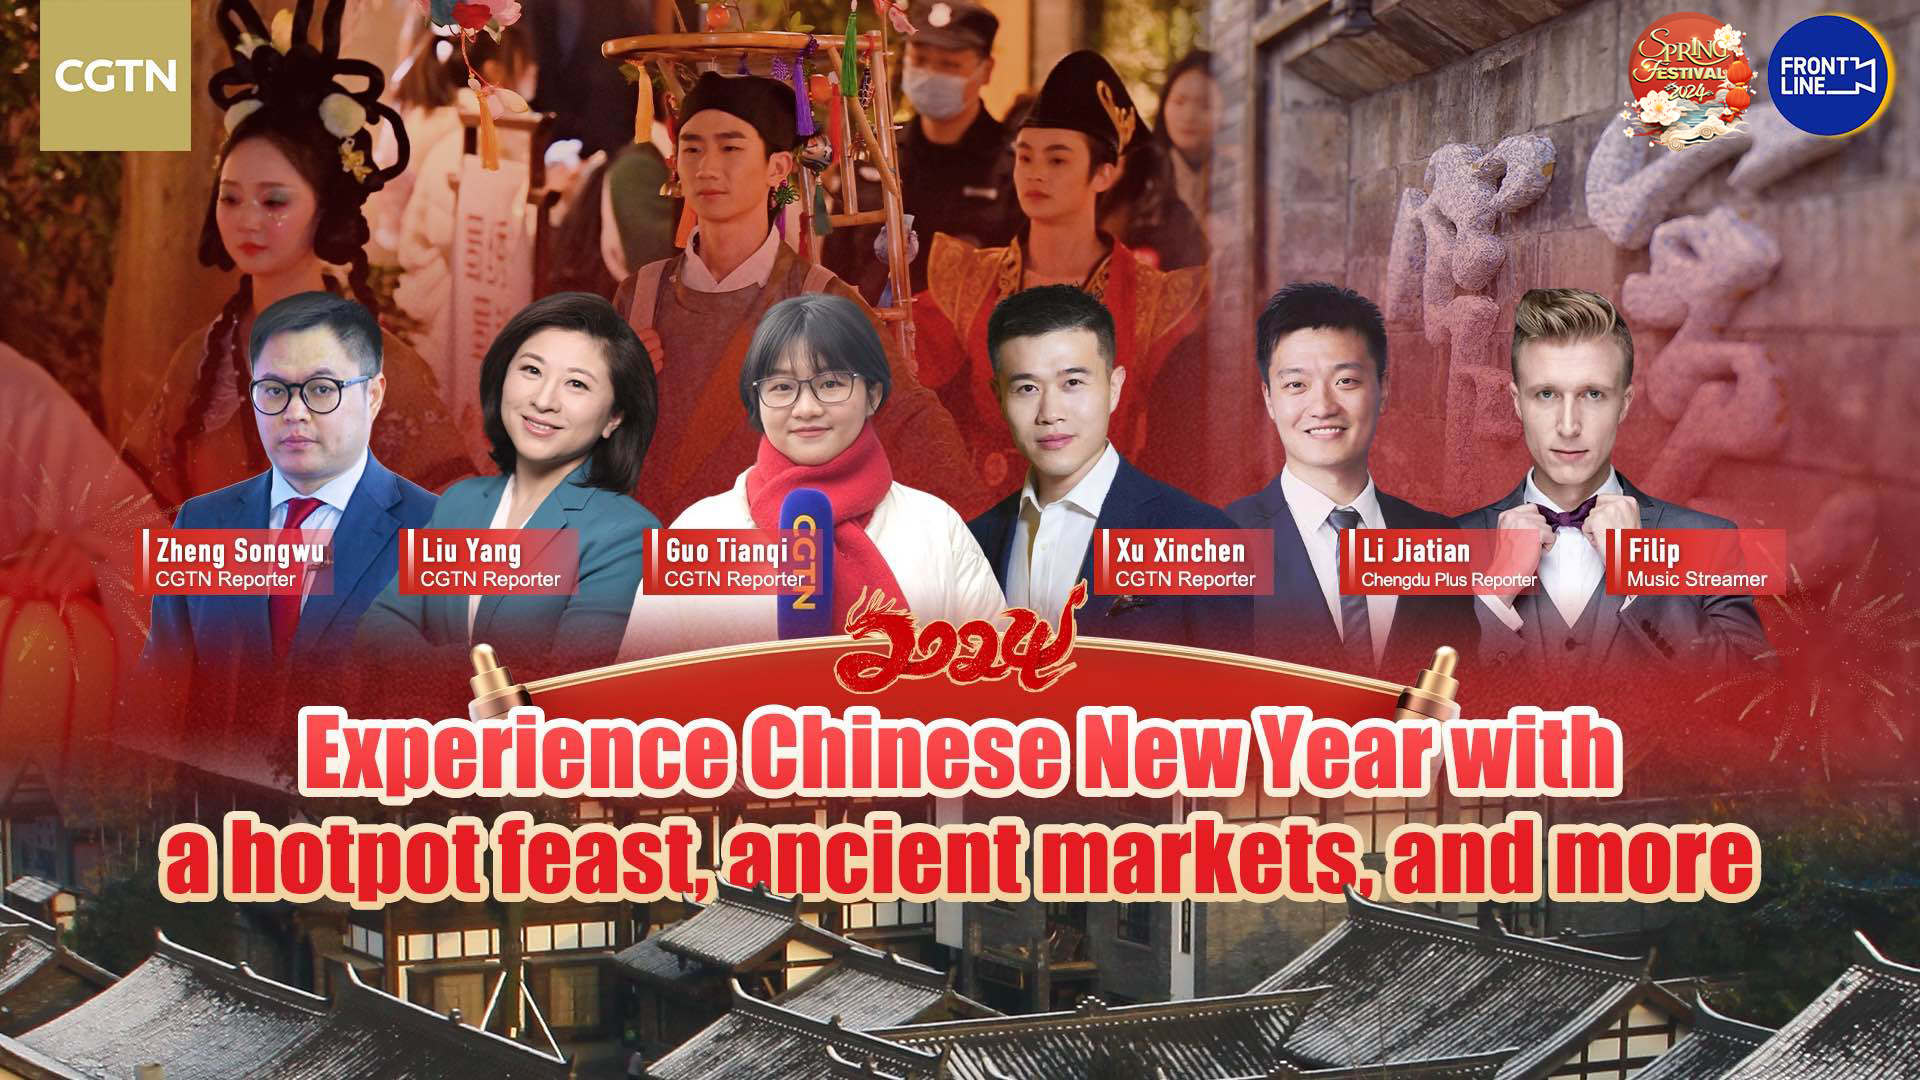 Live: Experience Chinese New Year with a hotpot feast, ancient market, and more